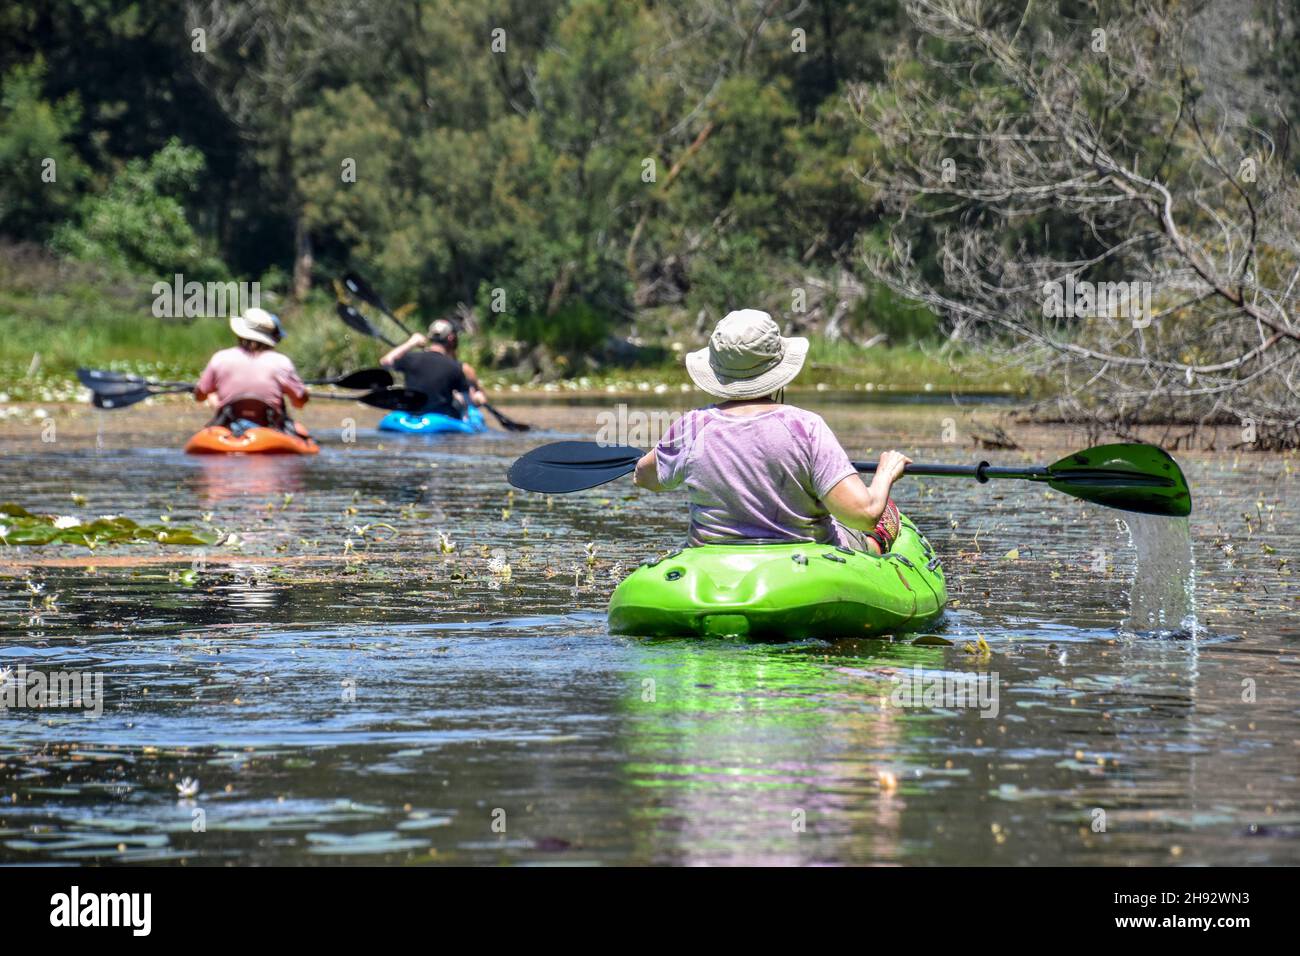 Tourists kayaking or canoeing in the Knysna river in the Garden Route South Africa on a beautiful sunny day Stock Photo